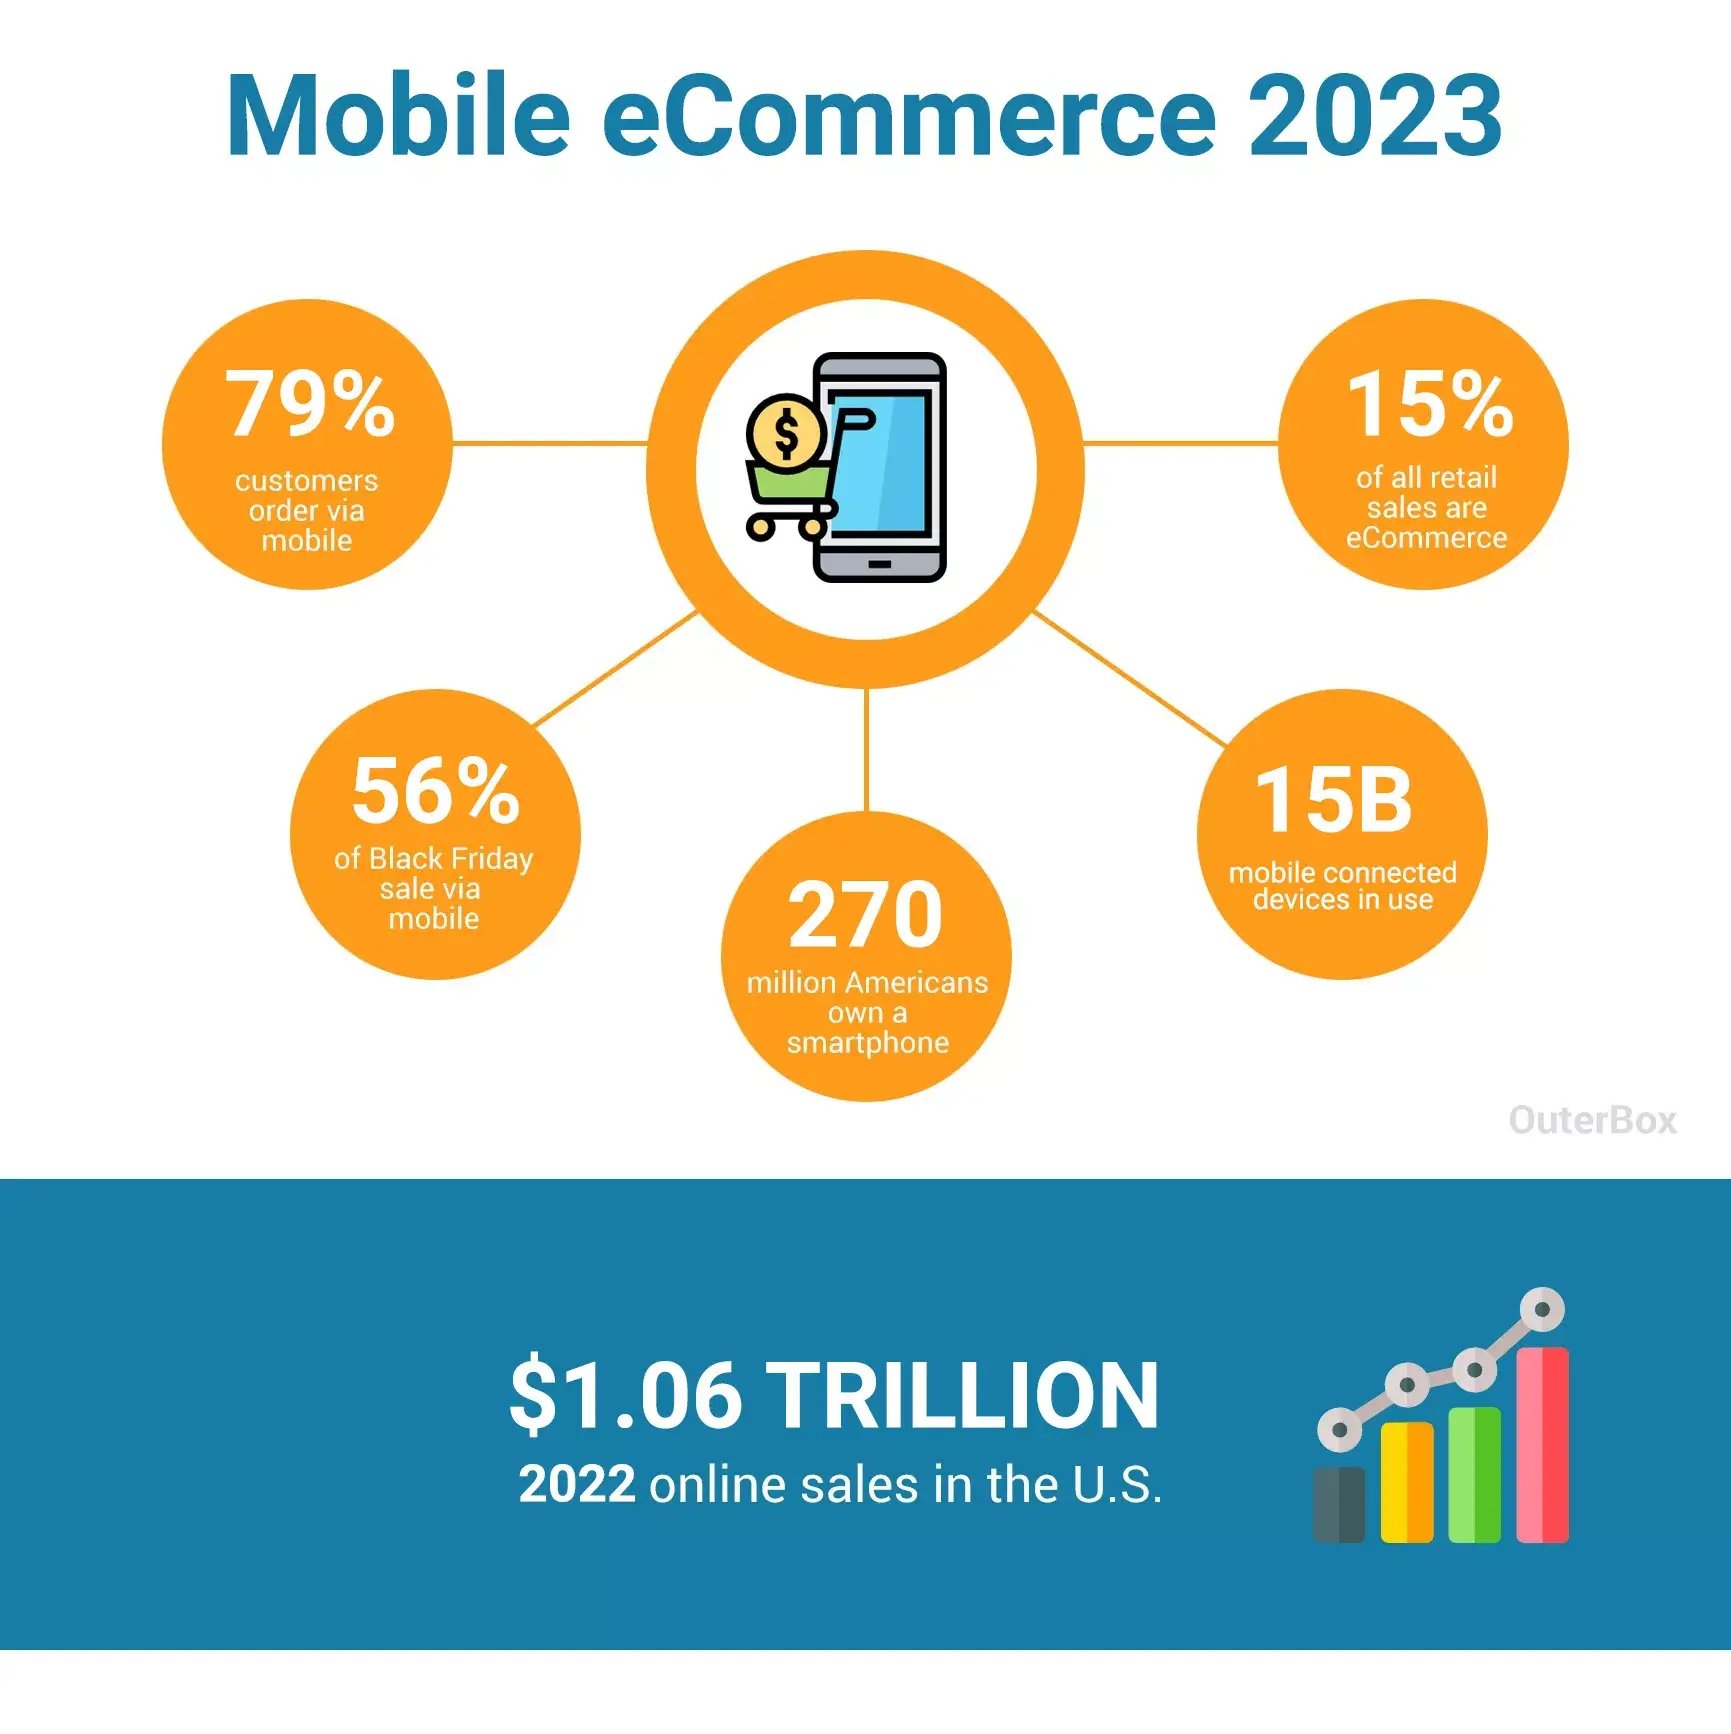 mobile-ecommerce-trends-infographic-2023.jpg